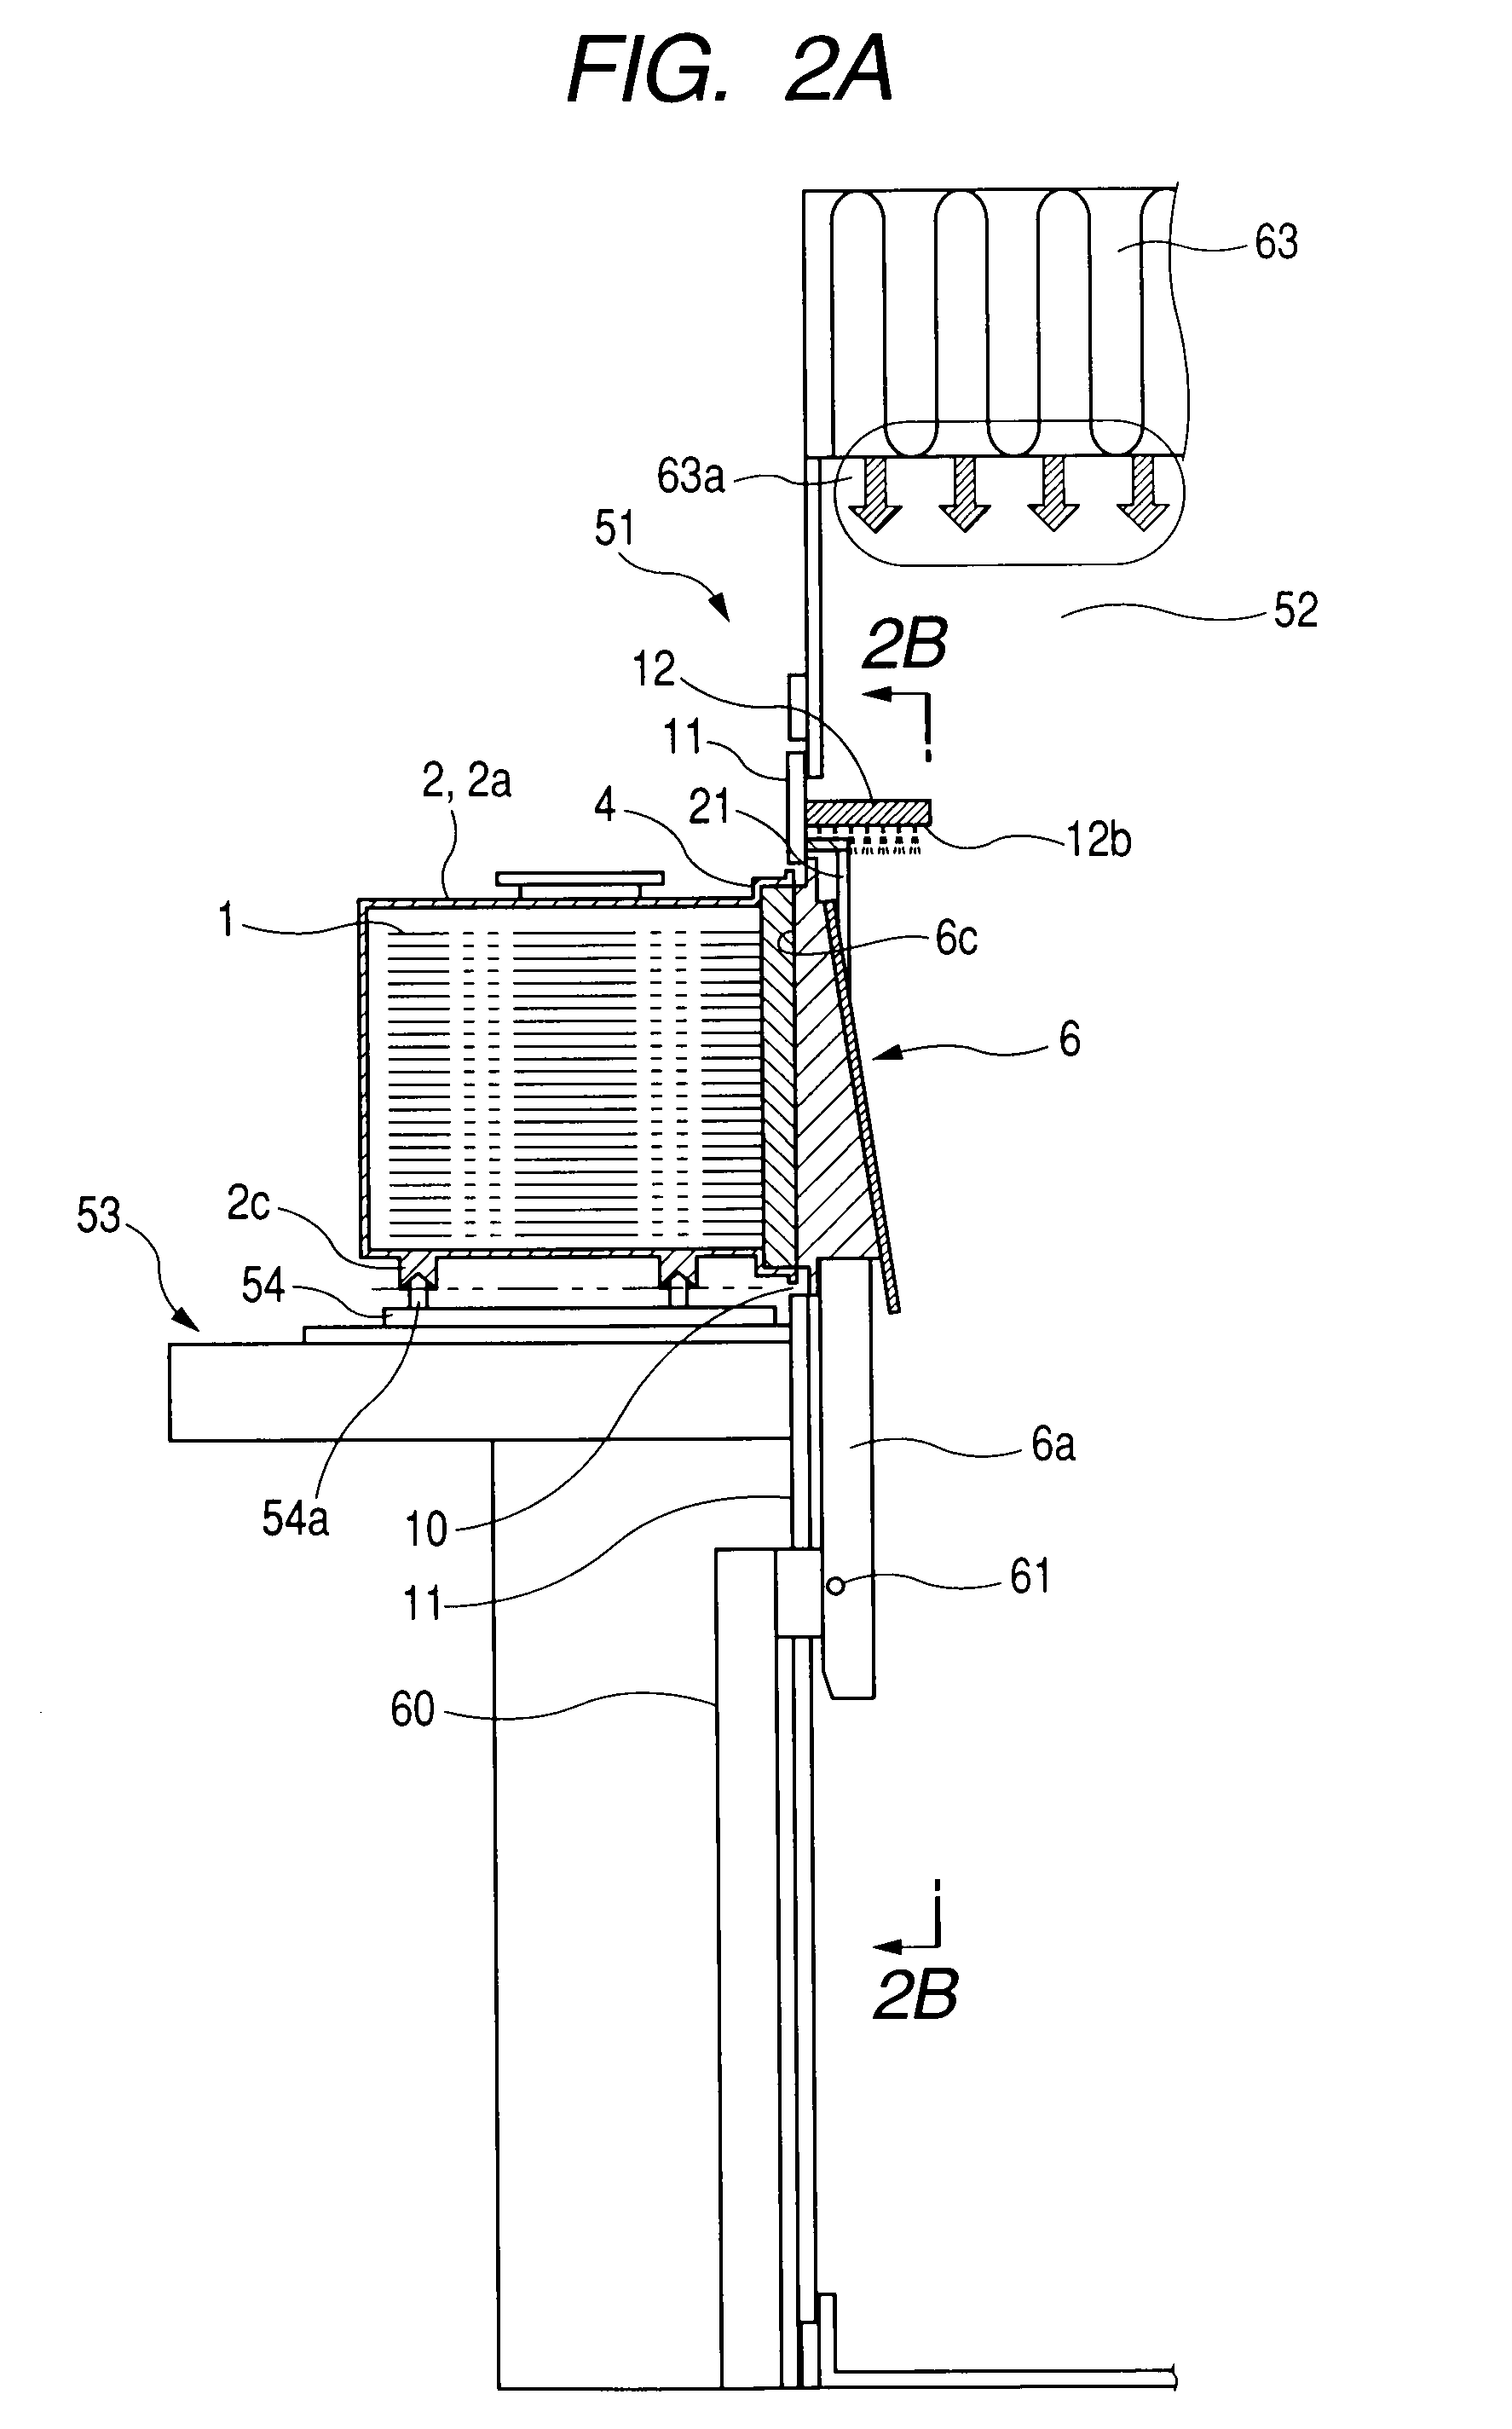 Method of processing an object in a container and lid opening/closing system used in the method